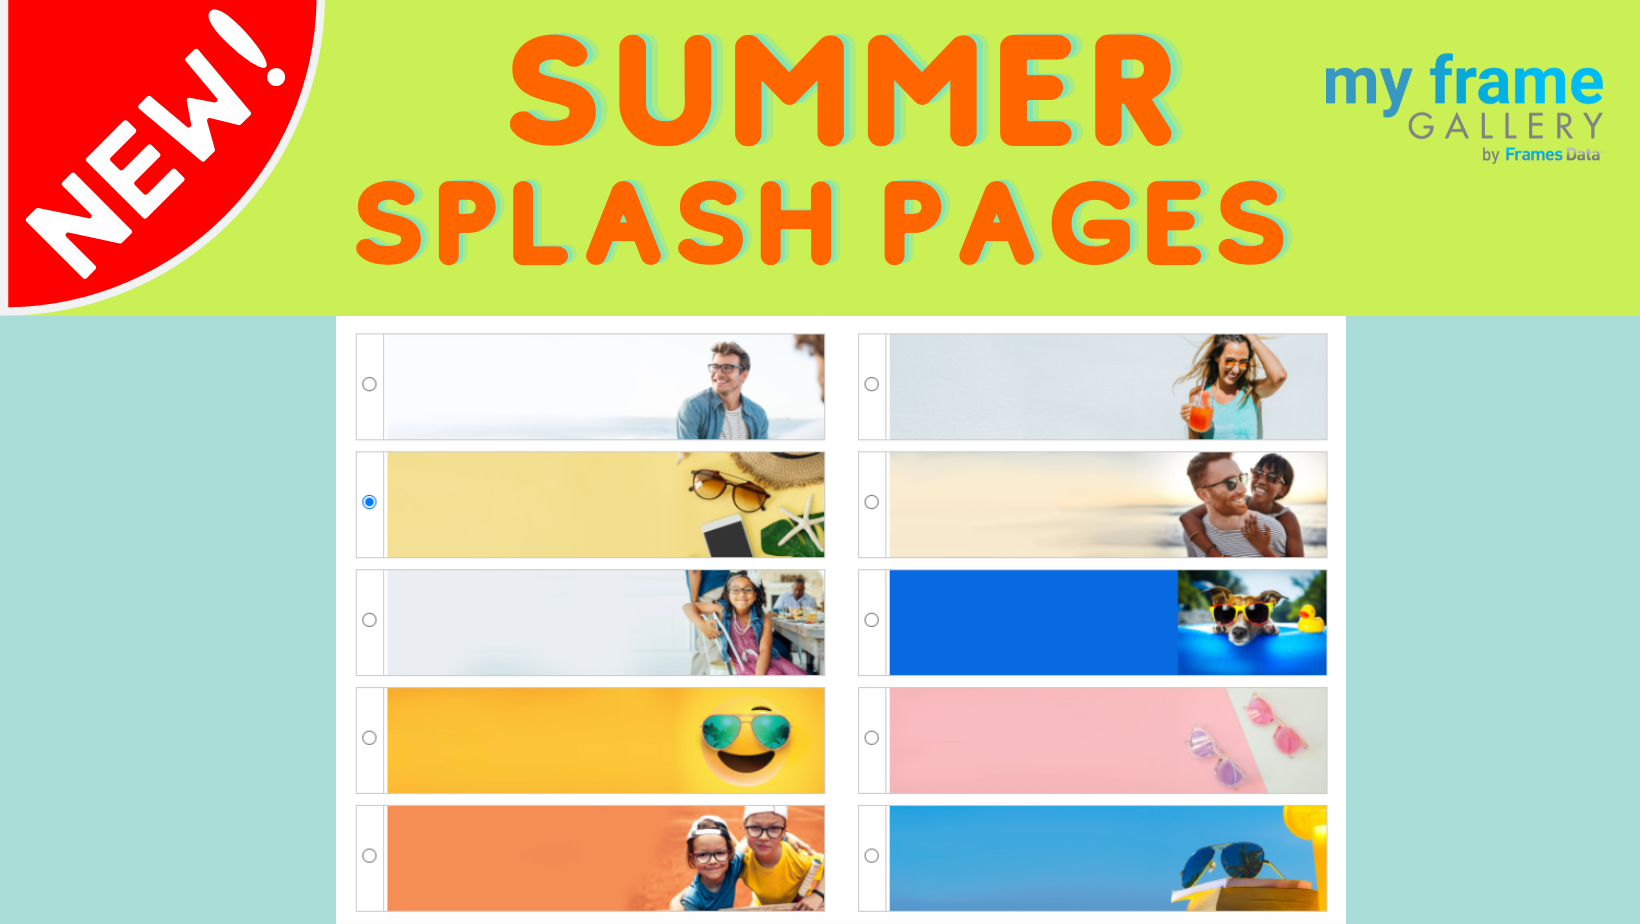 Summer Splash Pages for My Frame Gallery